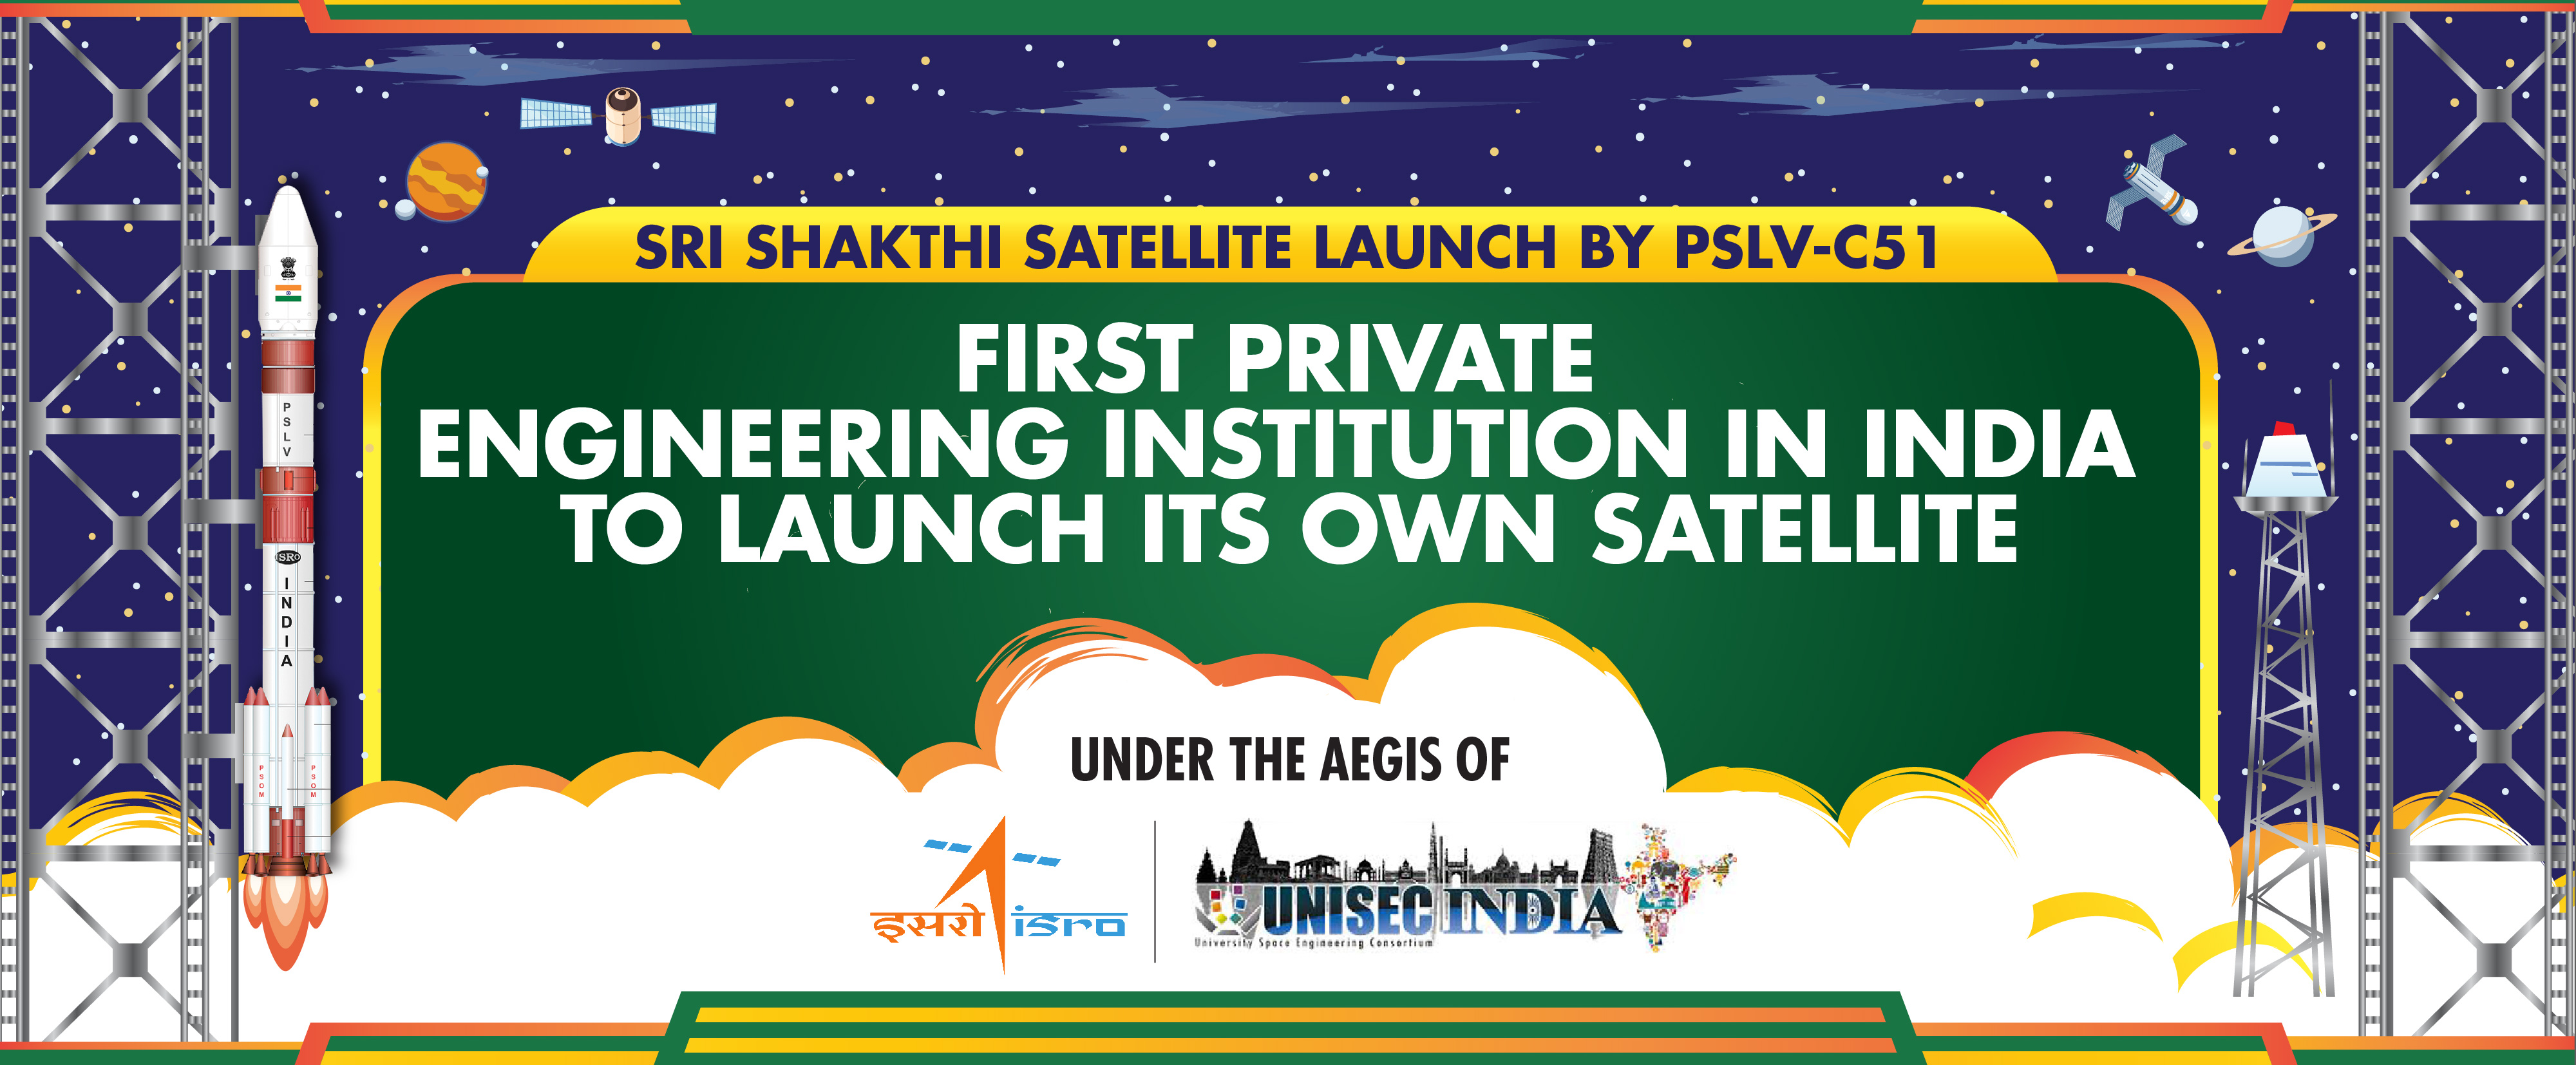 First Private Engineering Institution in India to Launch its own Staellite